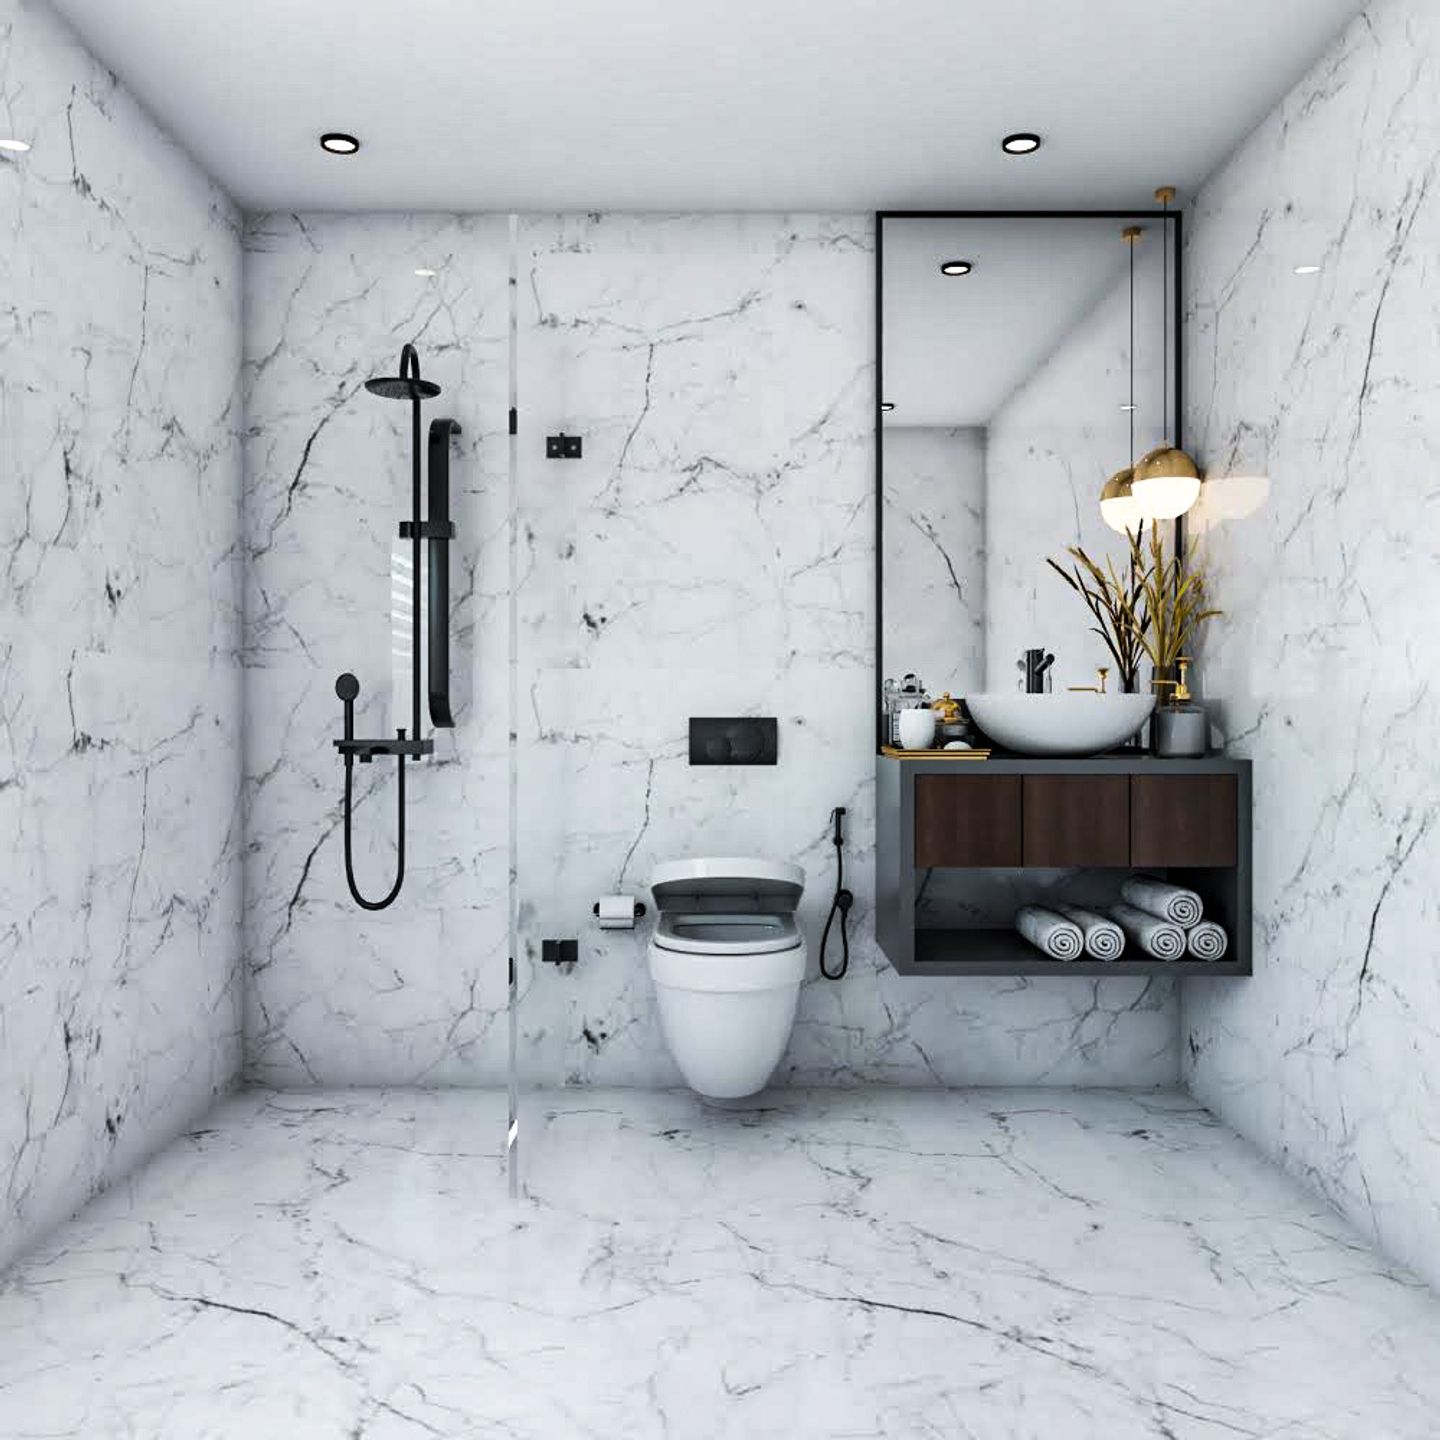 Bathroom Design With Marble Interiors And Wooden Vanity Unit - Livspace